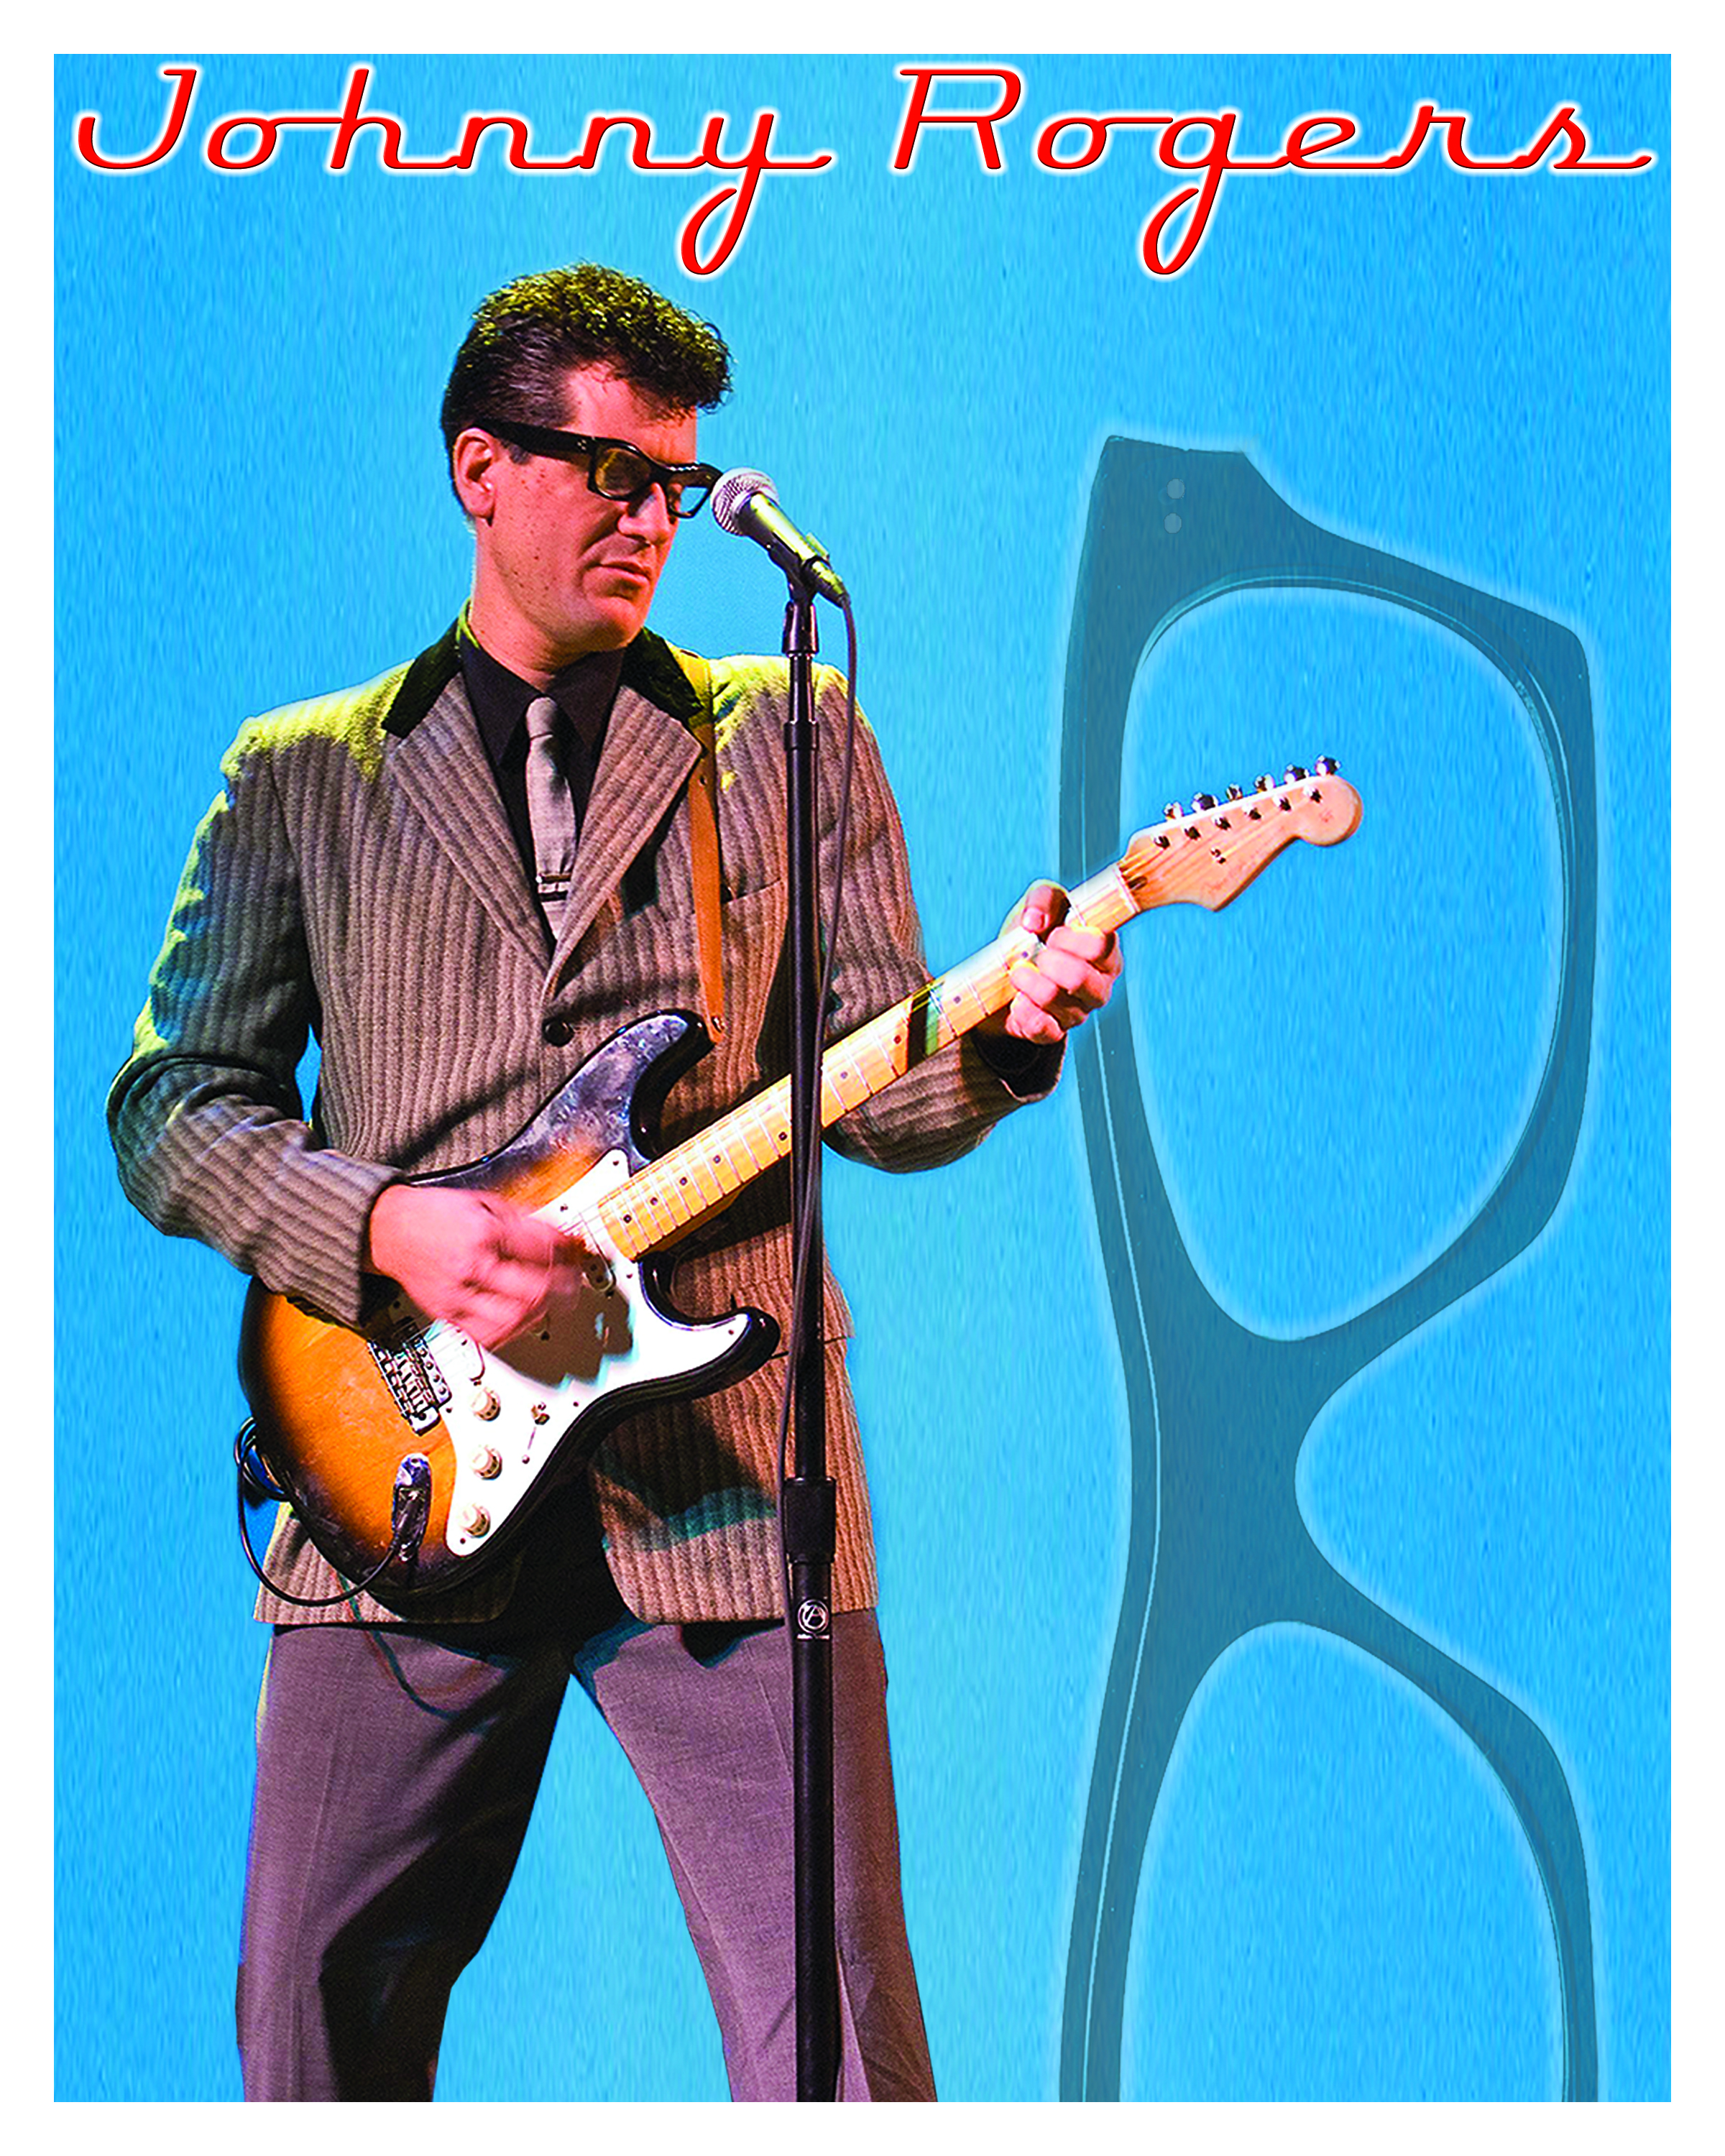 TRIBUTE TO BUDDY HOLLY, ROY ORBISON & LEGENDS OF ROCK, with entertainer extraordinaire: MR. JOHNNY ROGERS! 